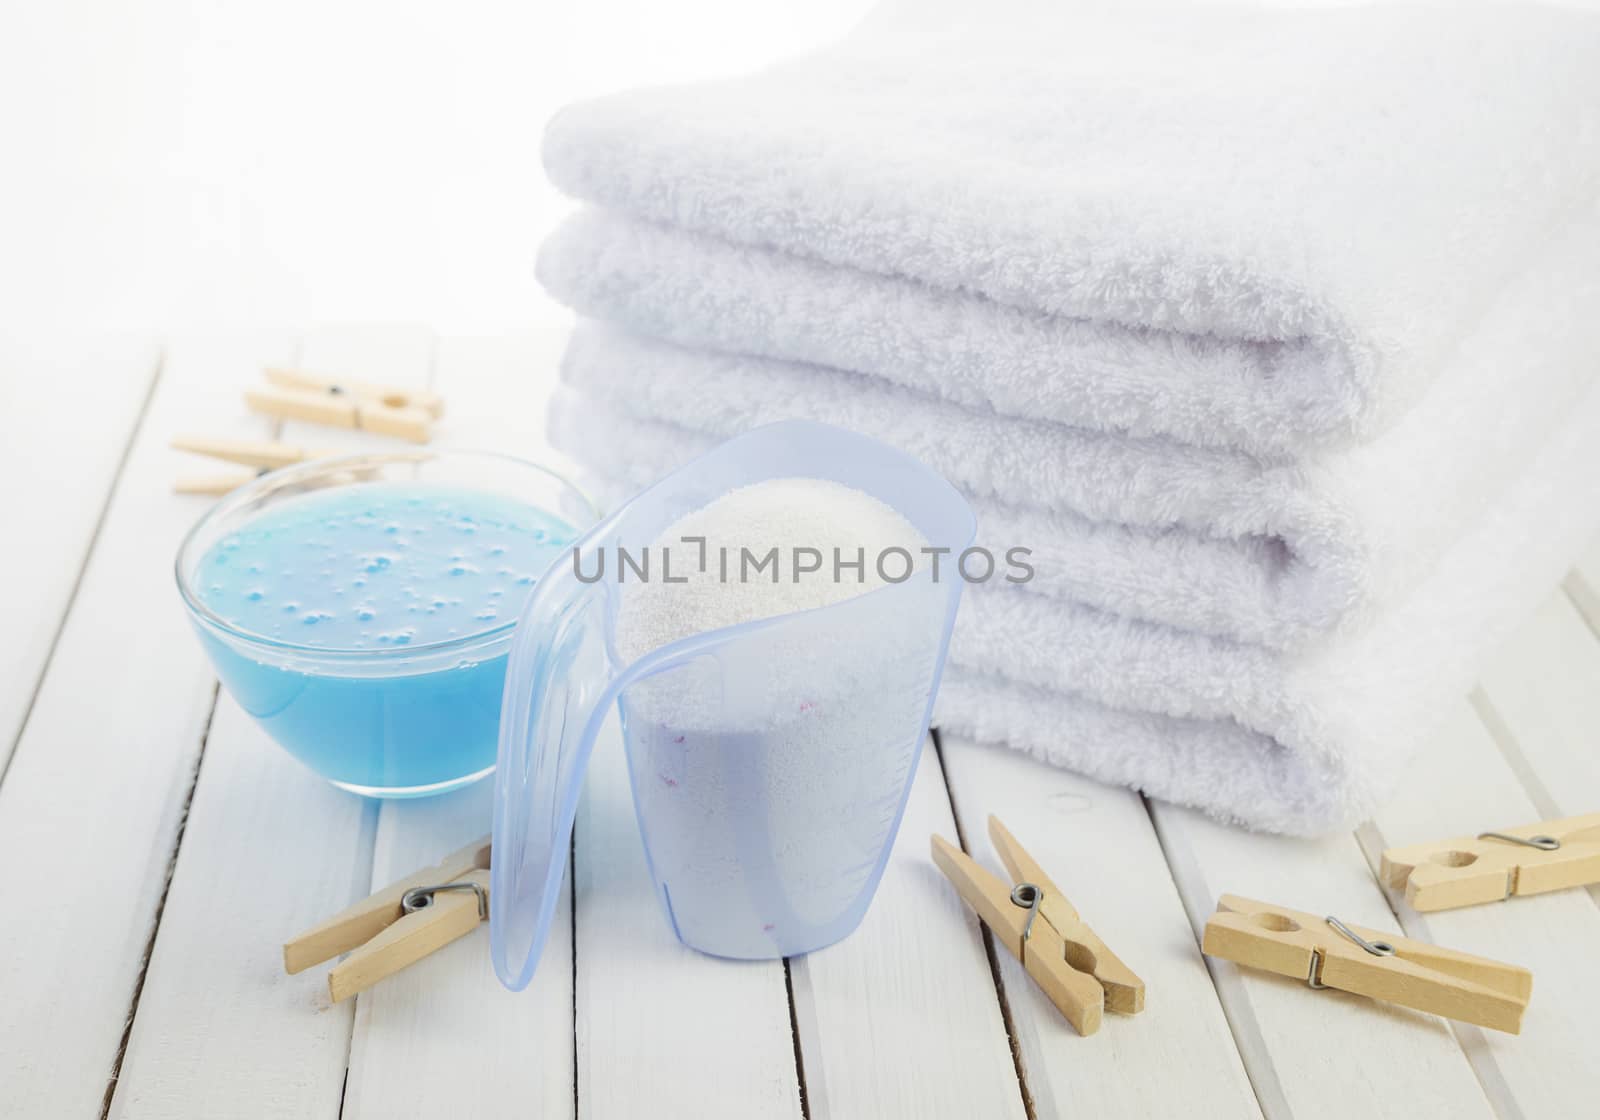 Stack of three white fluffy bath towels, washing powder in measuring cup, blue fabric softener in a transparent glass bowl and wooden clothespins on the background of white boards